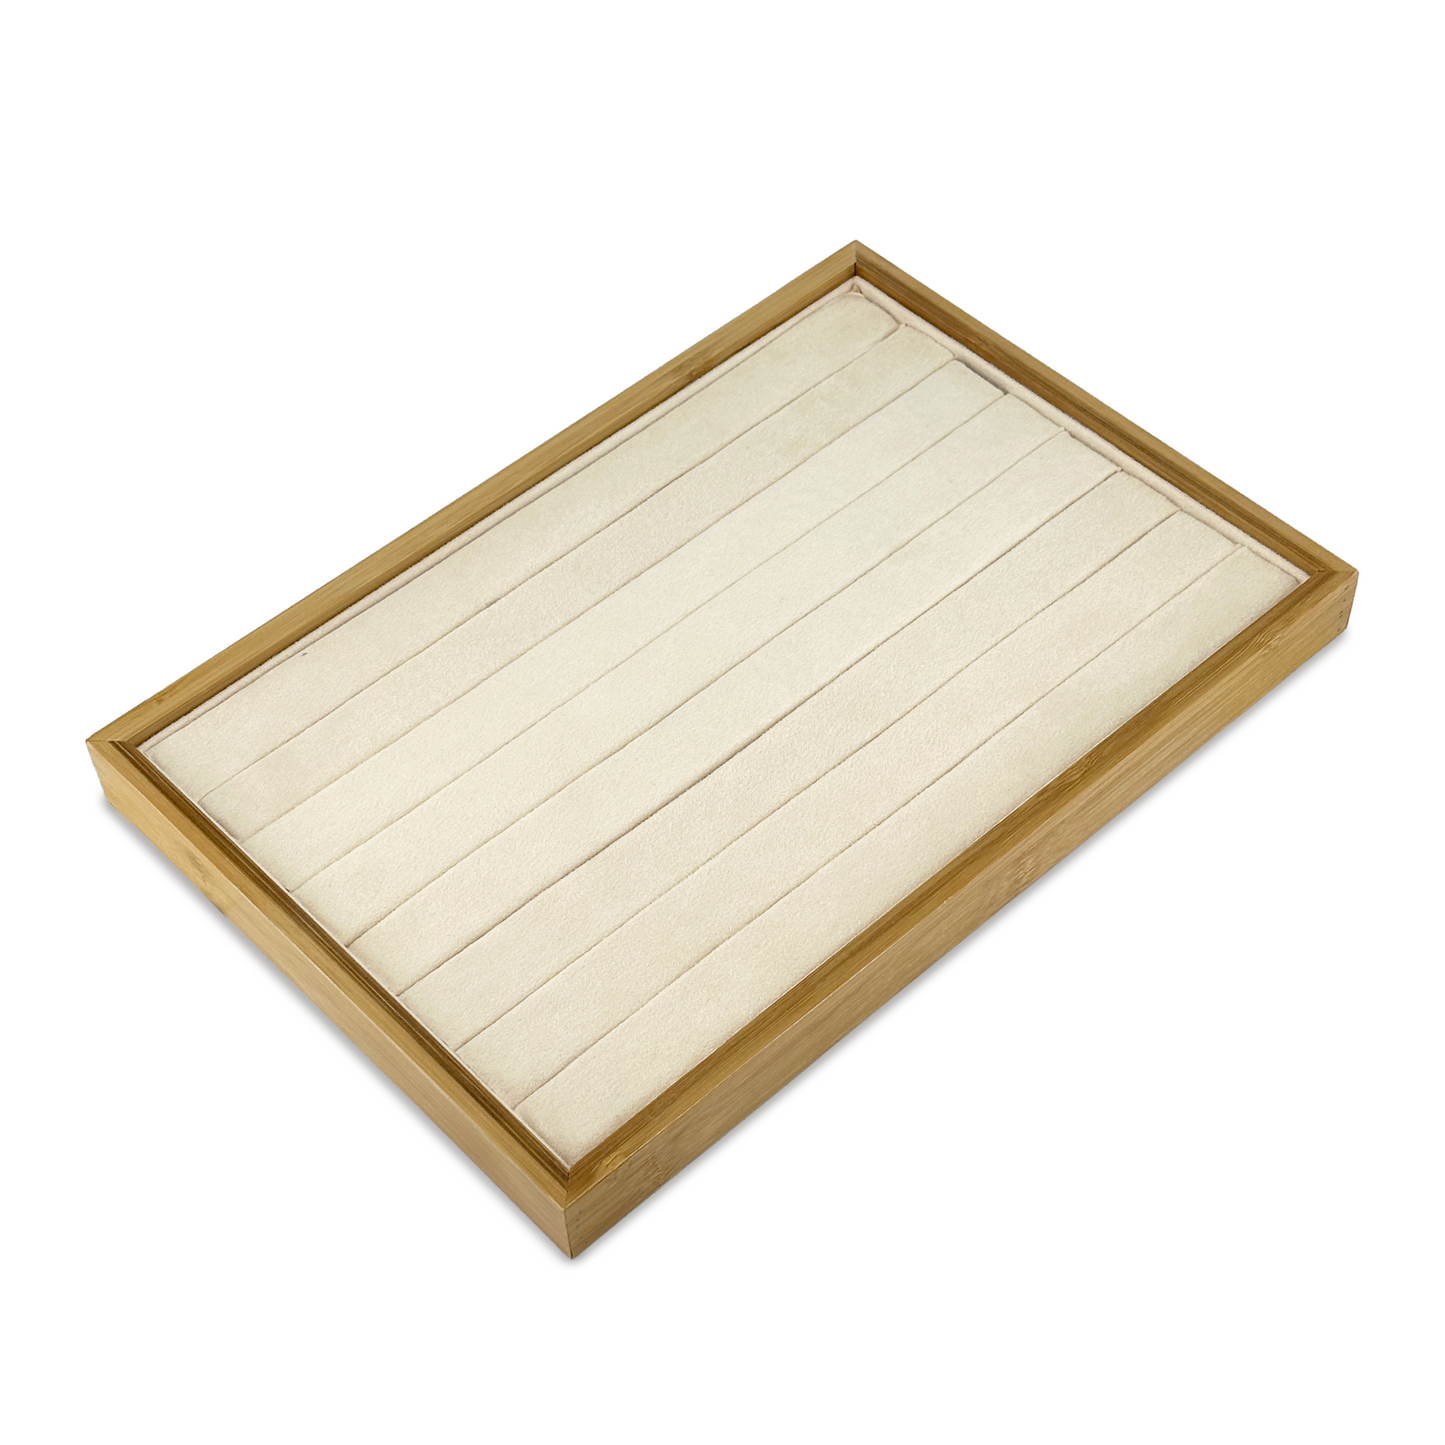 14" x 9 1/2" Wood and Suede 8 Roll Ring Display Tray